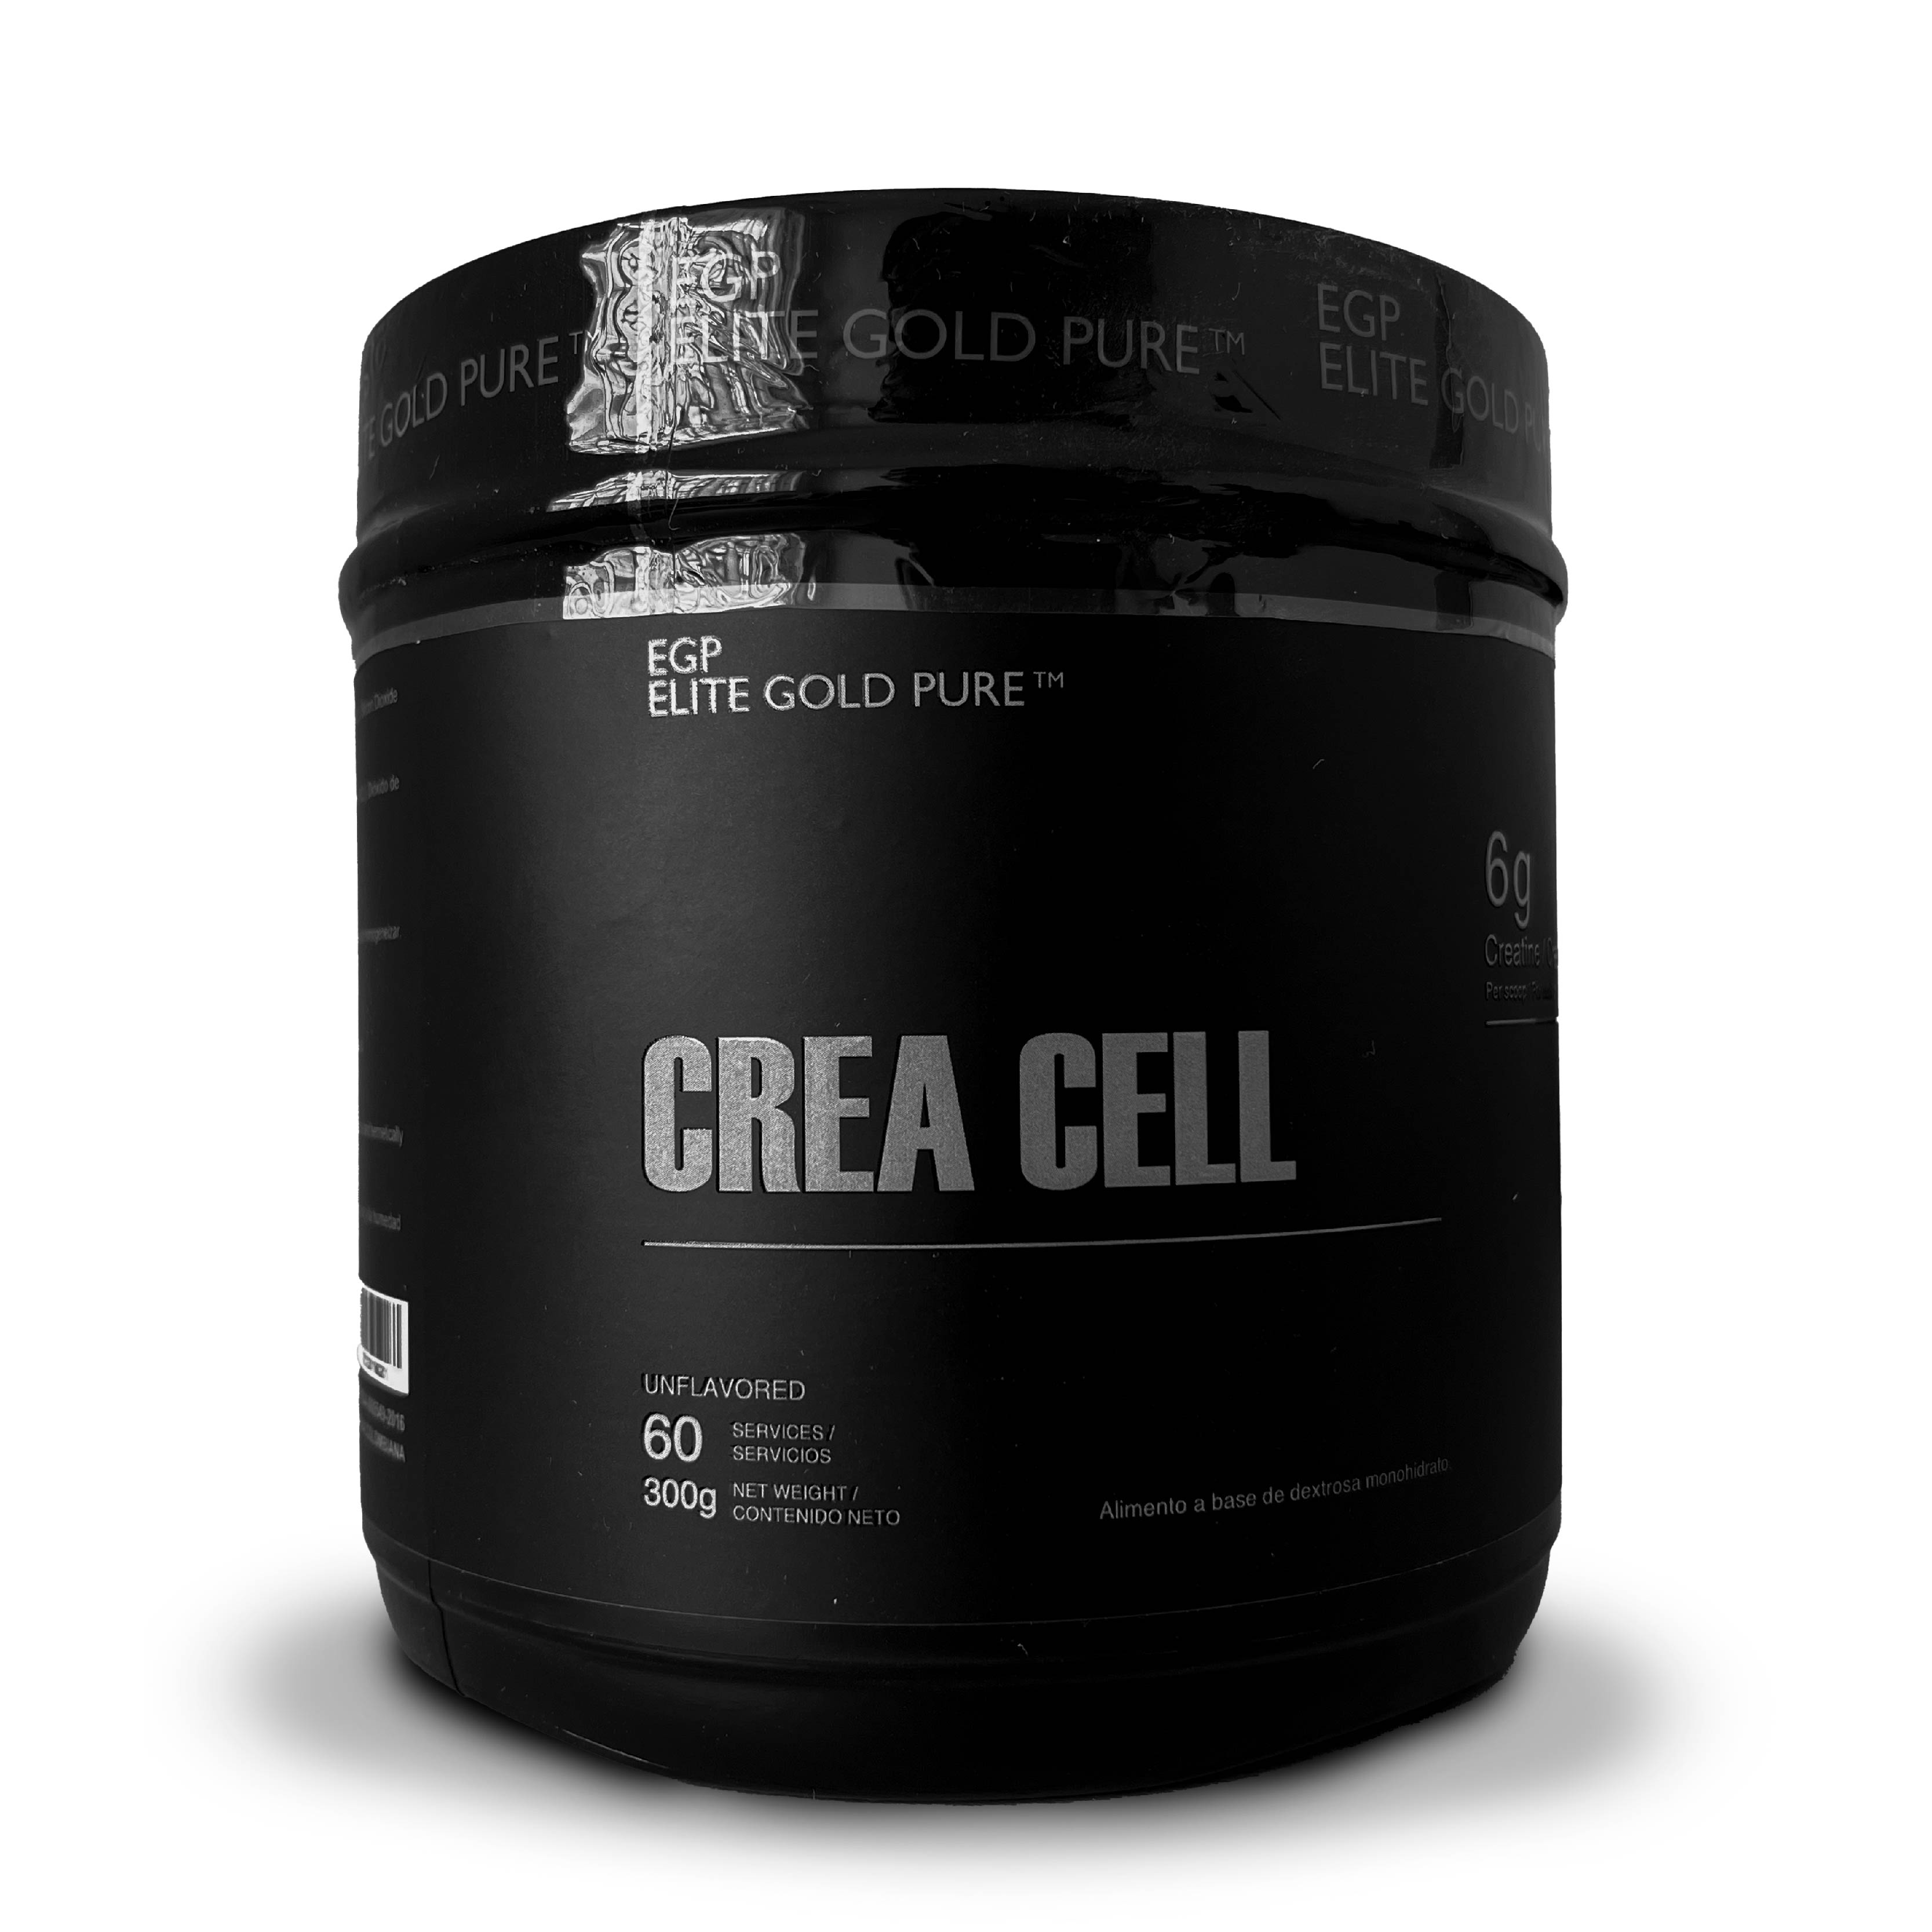 CREA CELL 300 GRAMOS UNFLAVORED – EGP ELITE GOLD PURE